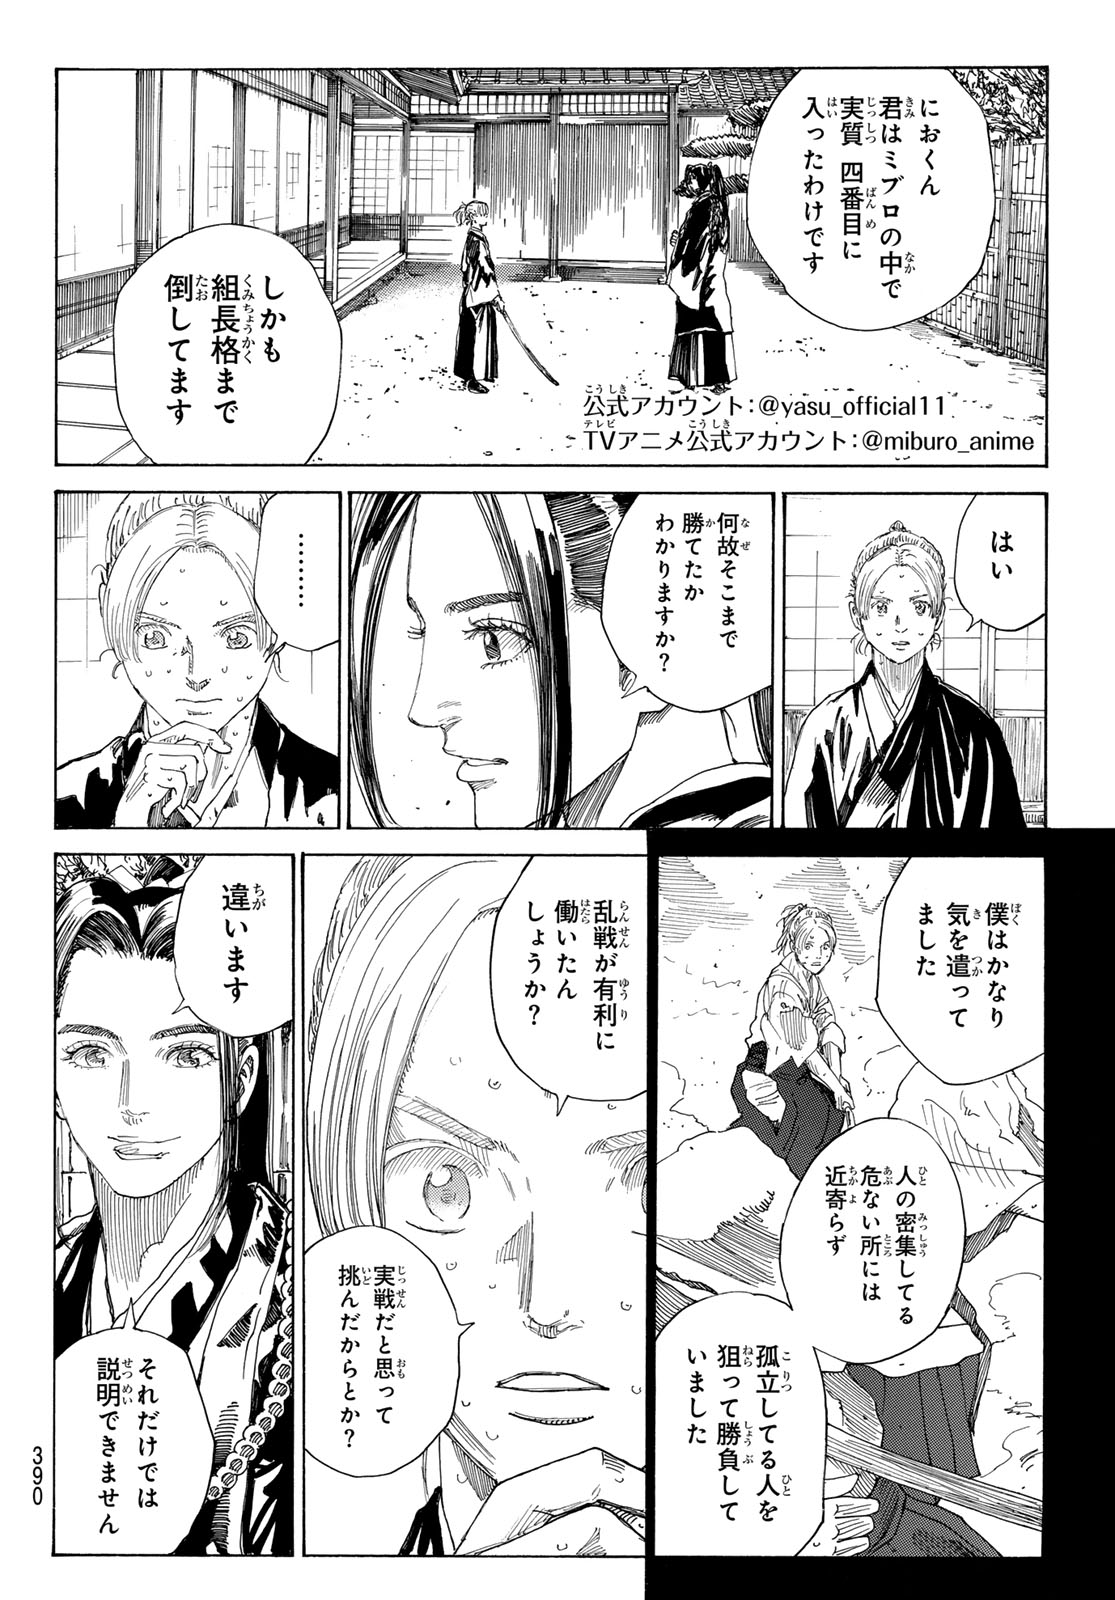 An Mo Miburo 第129話 - Page 2